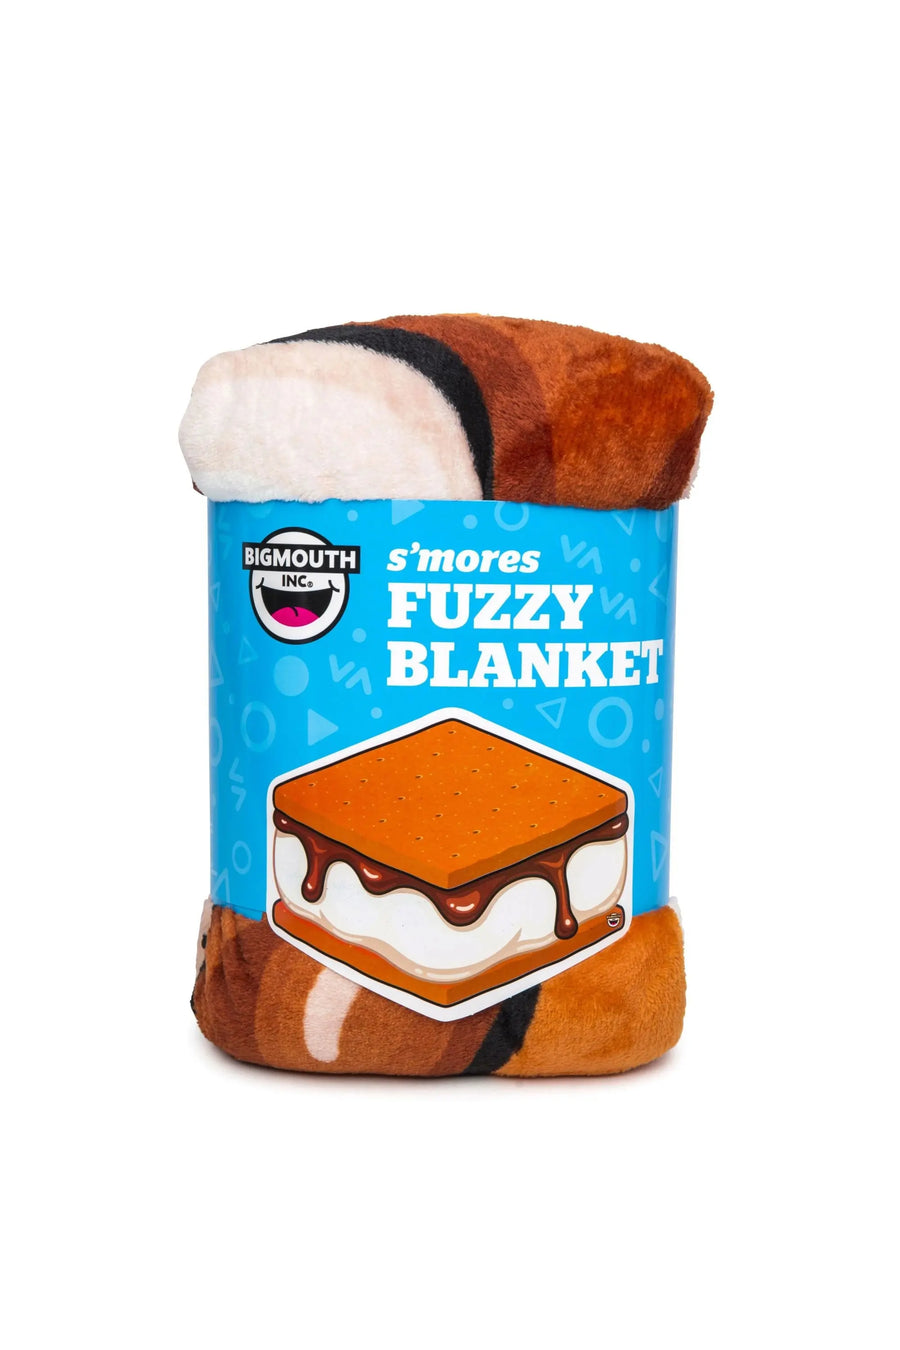 S'MORES THROW BLANKET 22 Big Mouth